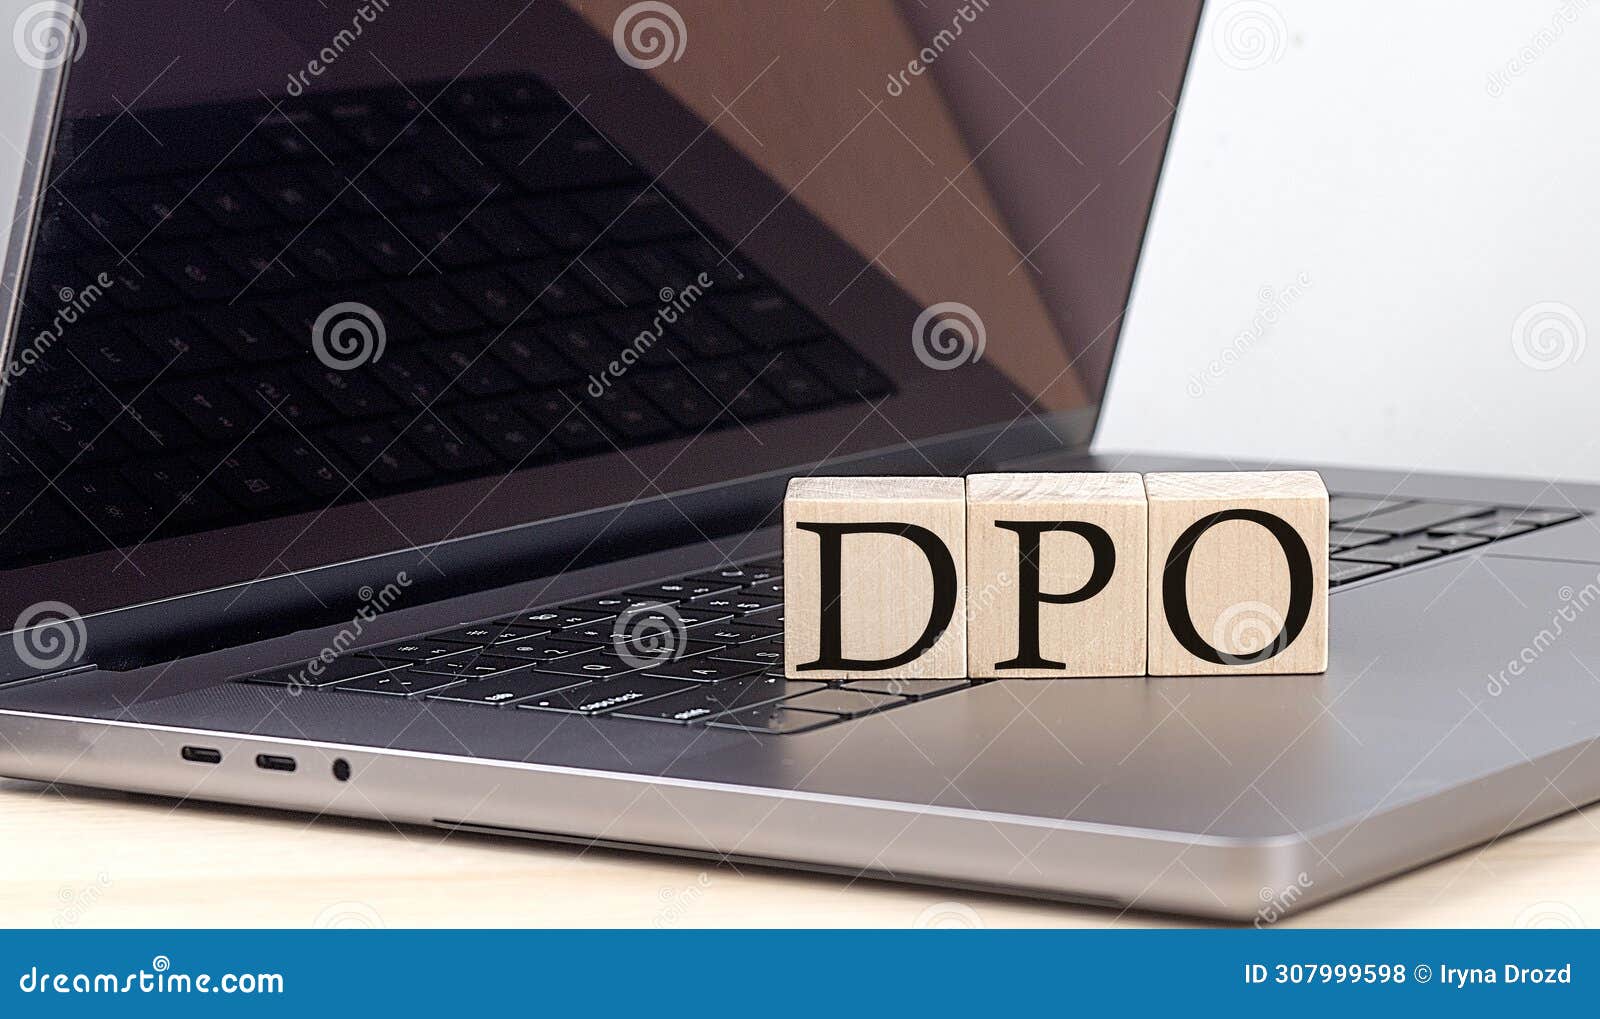 dpo word on wooden block on laptop, business concept